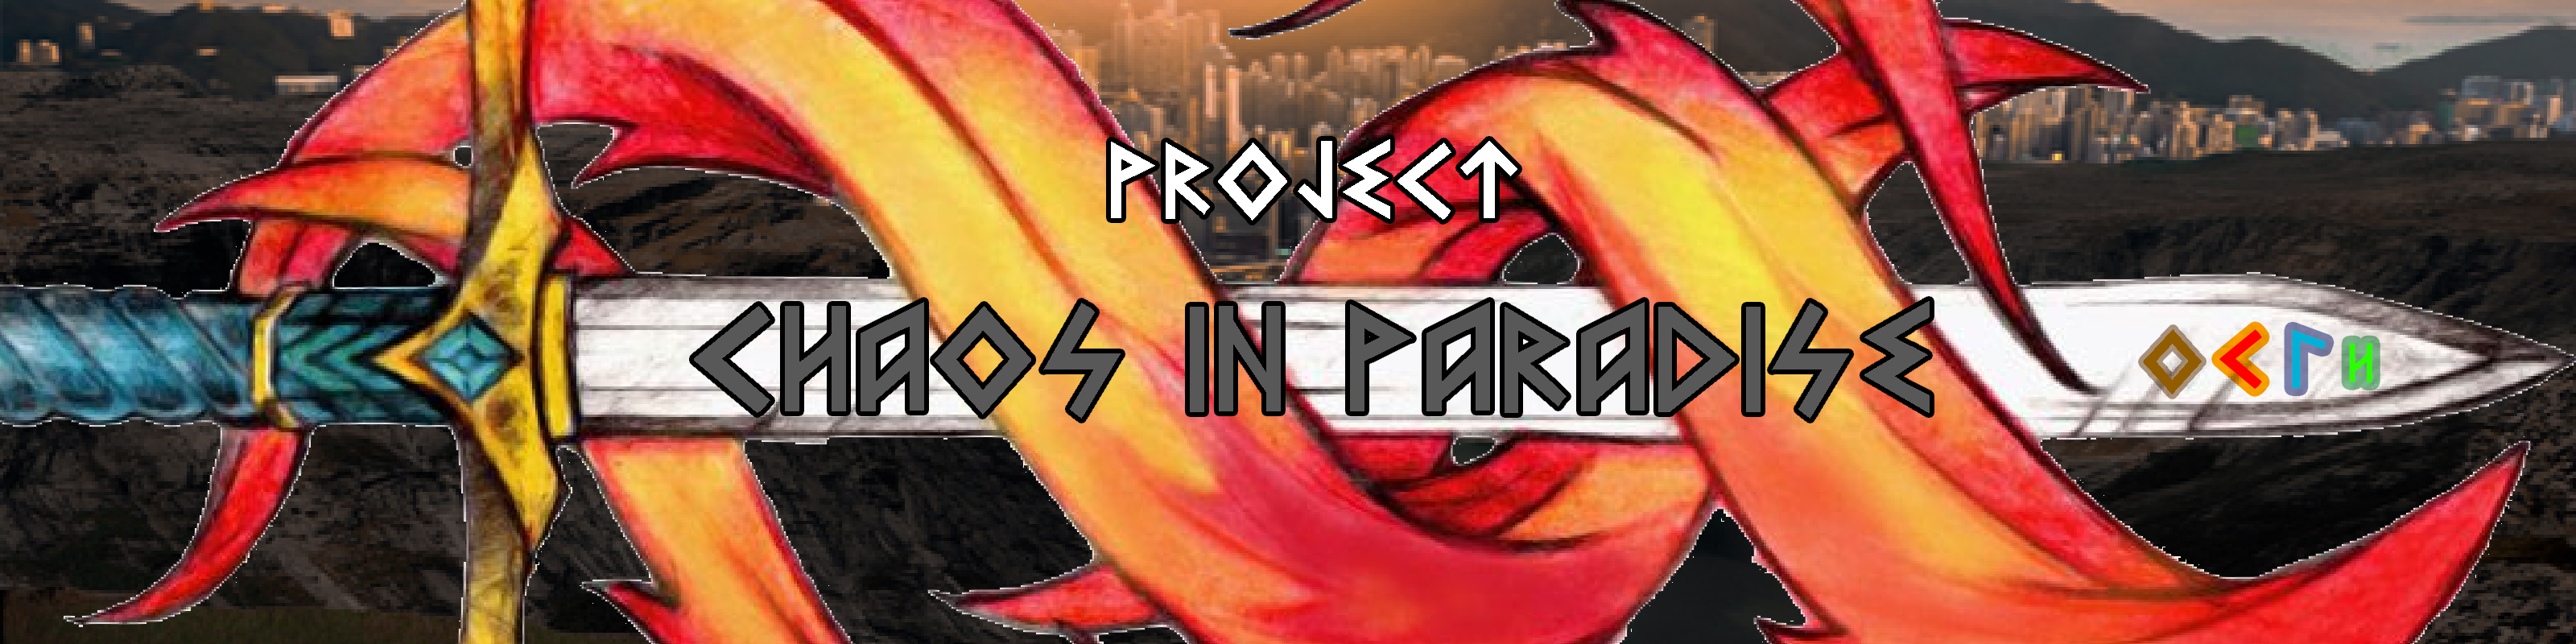 Project Chaos in Paradise